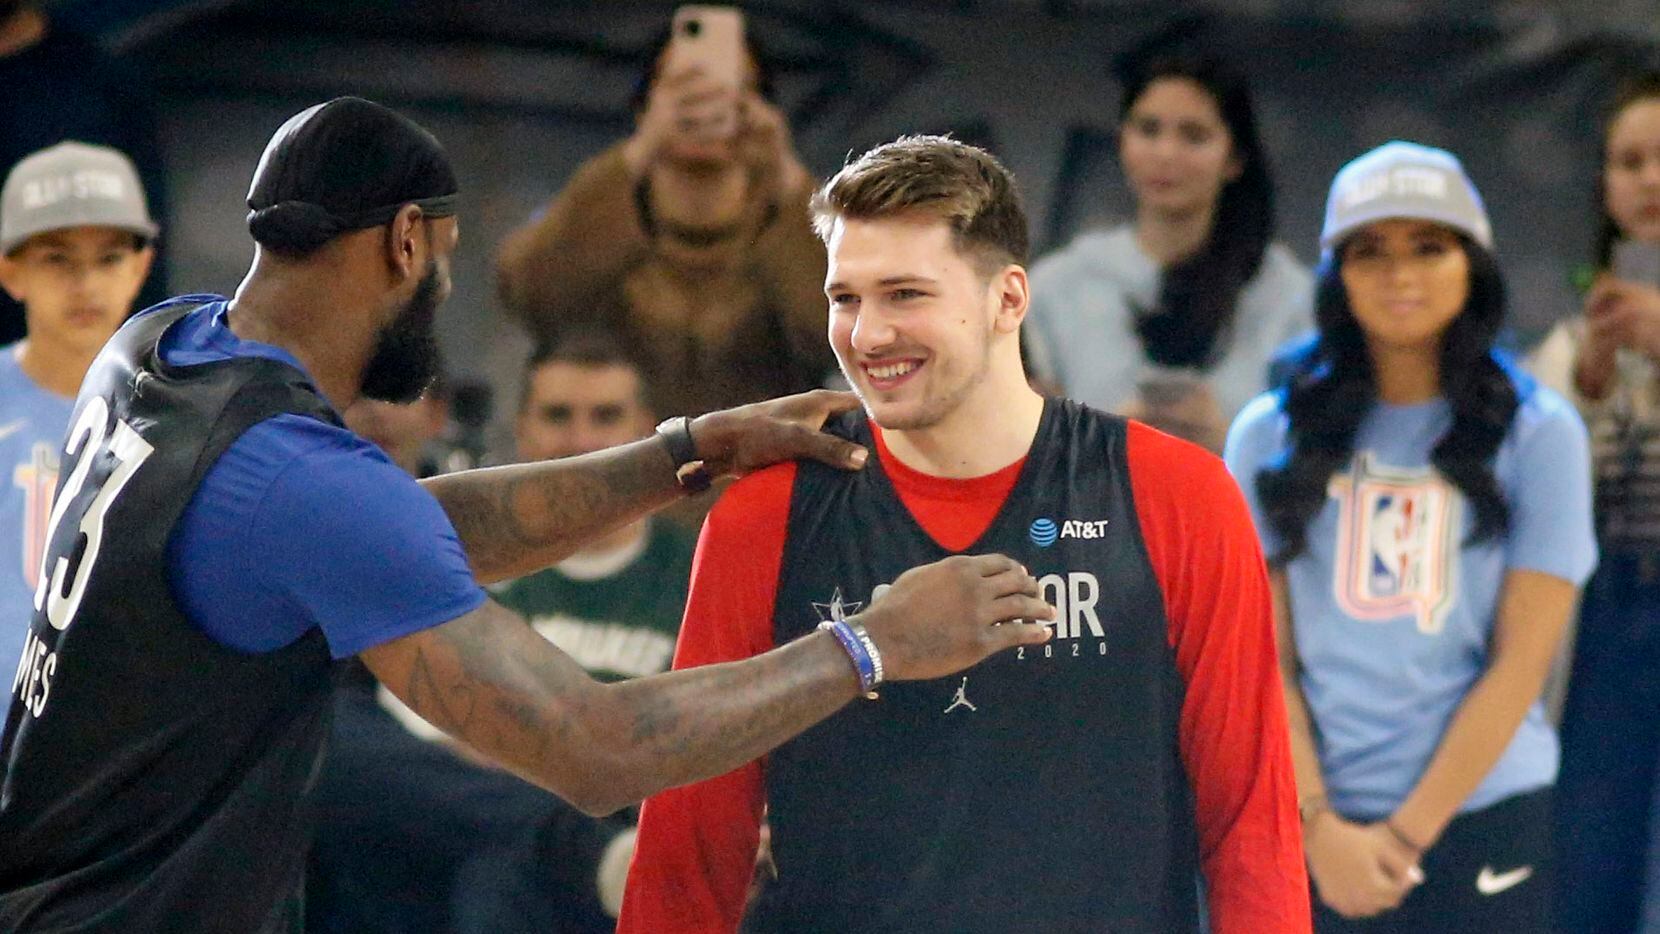 Carlisle Porzingis Praise Magical All Star Weekend For Luka Doncic As Mavs Prepare For Second Half